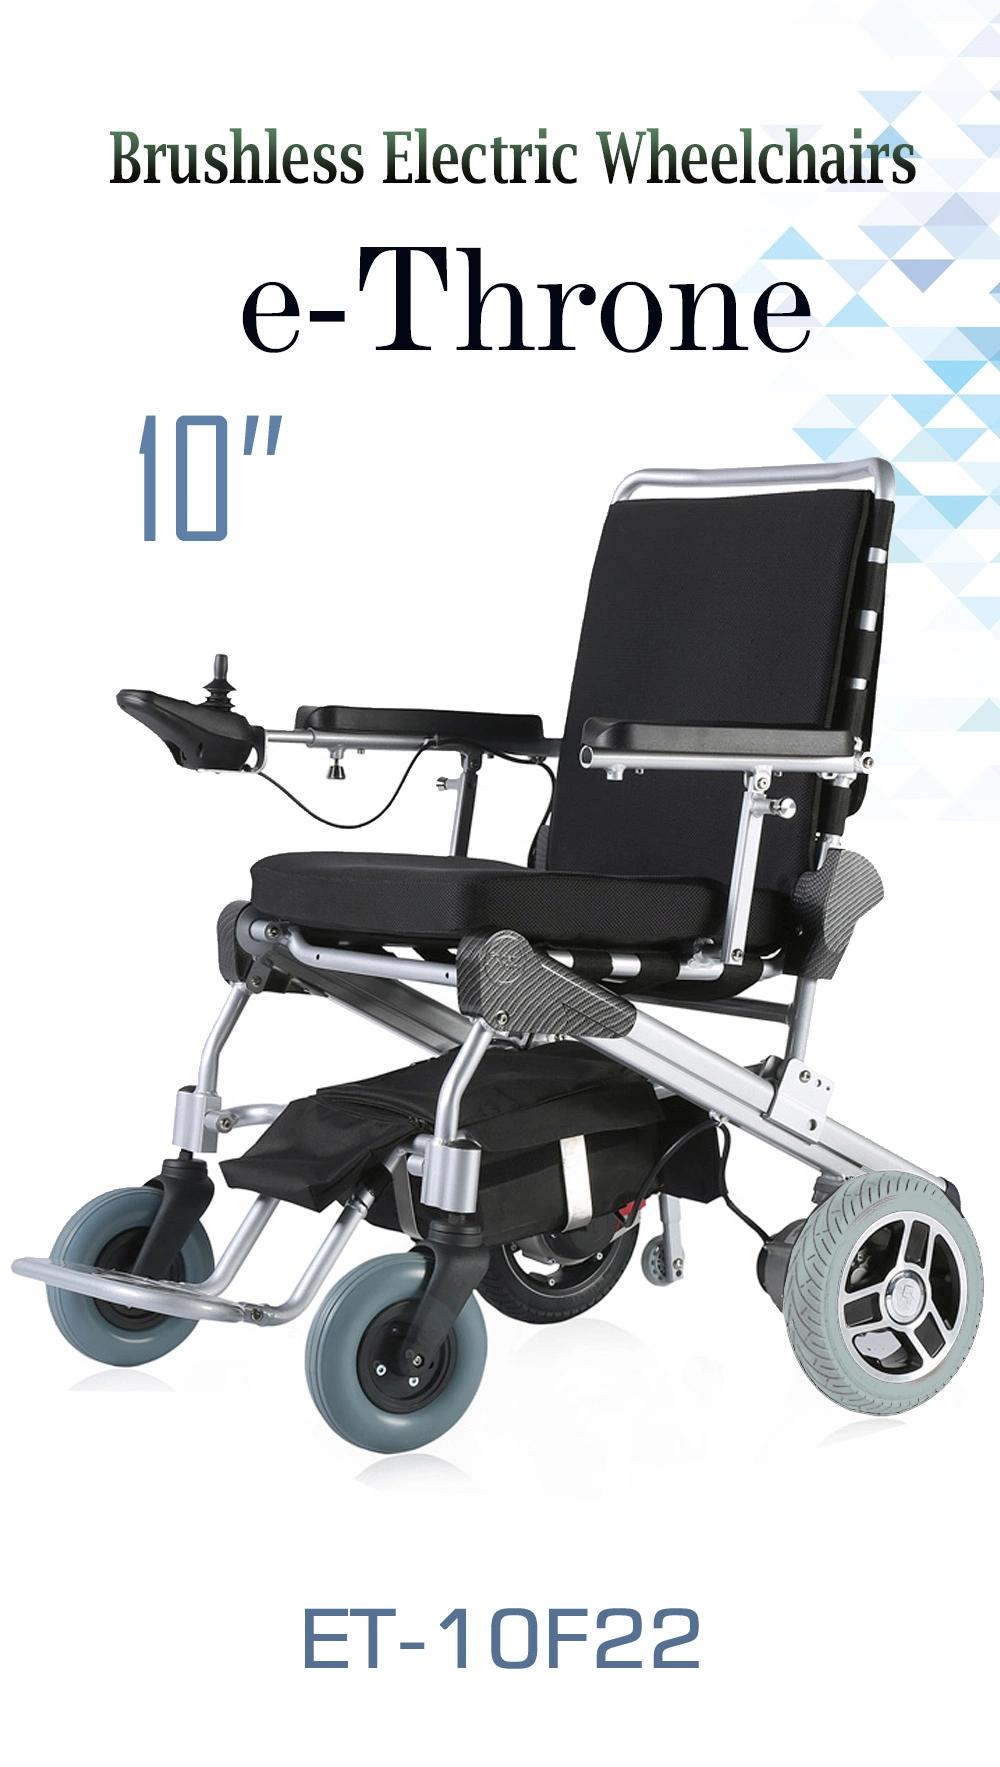 Ultra Strong Fame, Patented Design,East Folding / unfolding, portable and foldable electric mobility wheelchair with 10′′ quick removable motors, 15kg only